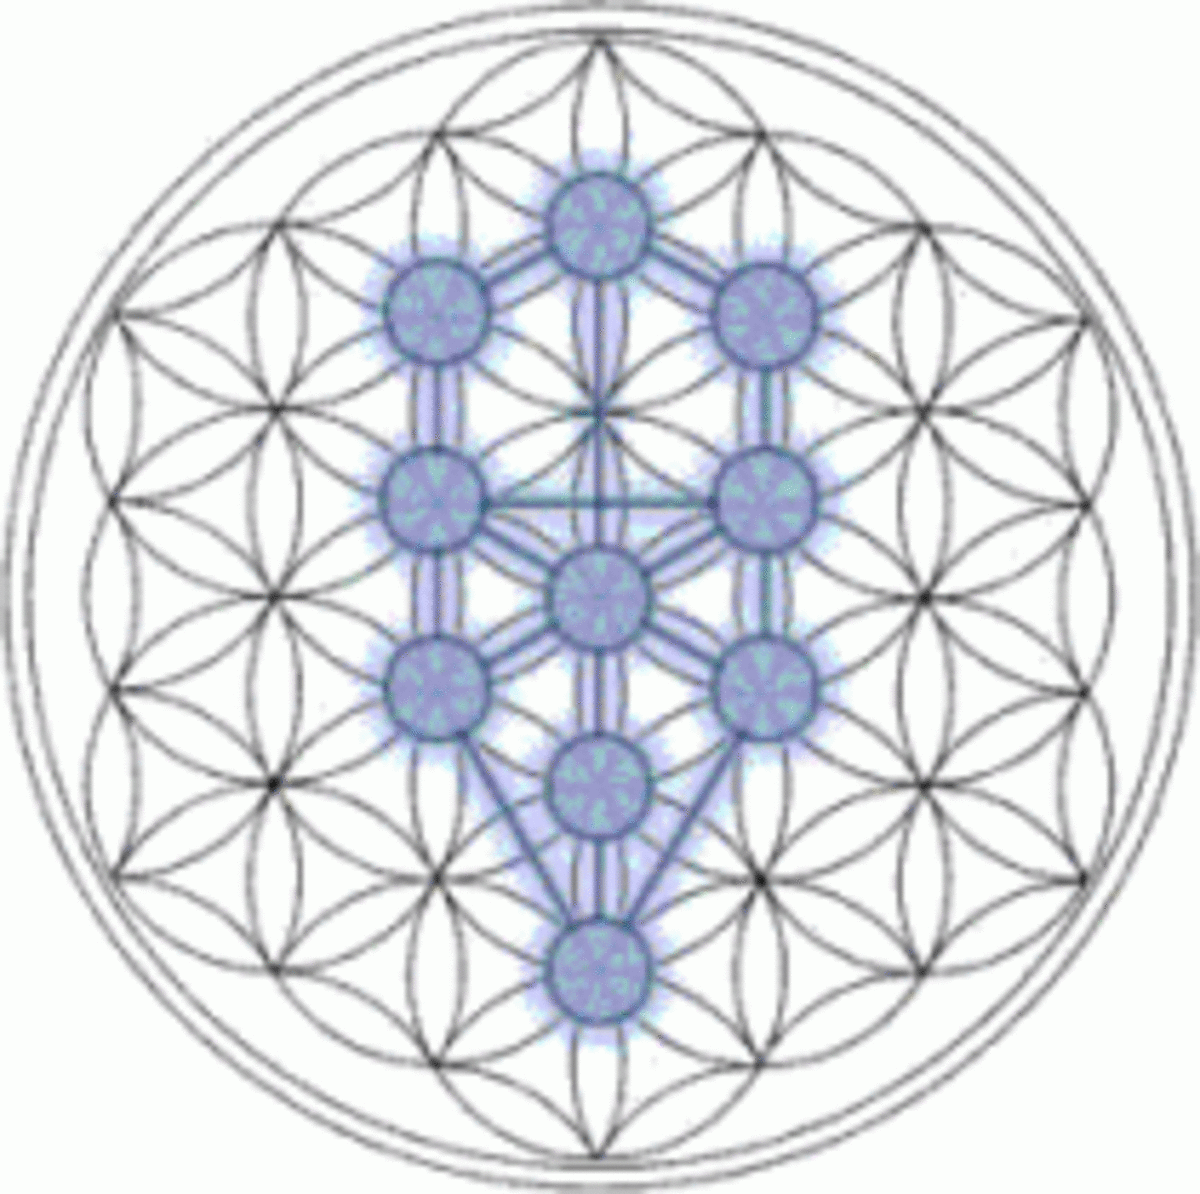 The Tree of Life fits inside the Flower of Life easily, showing why this symbol of the ancients was an important source of knowledge.